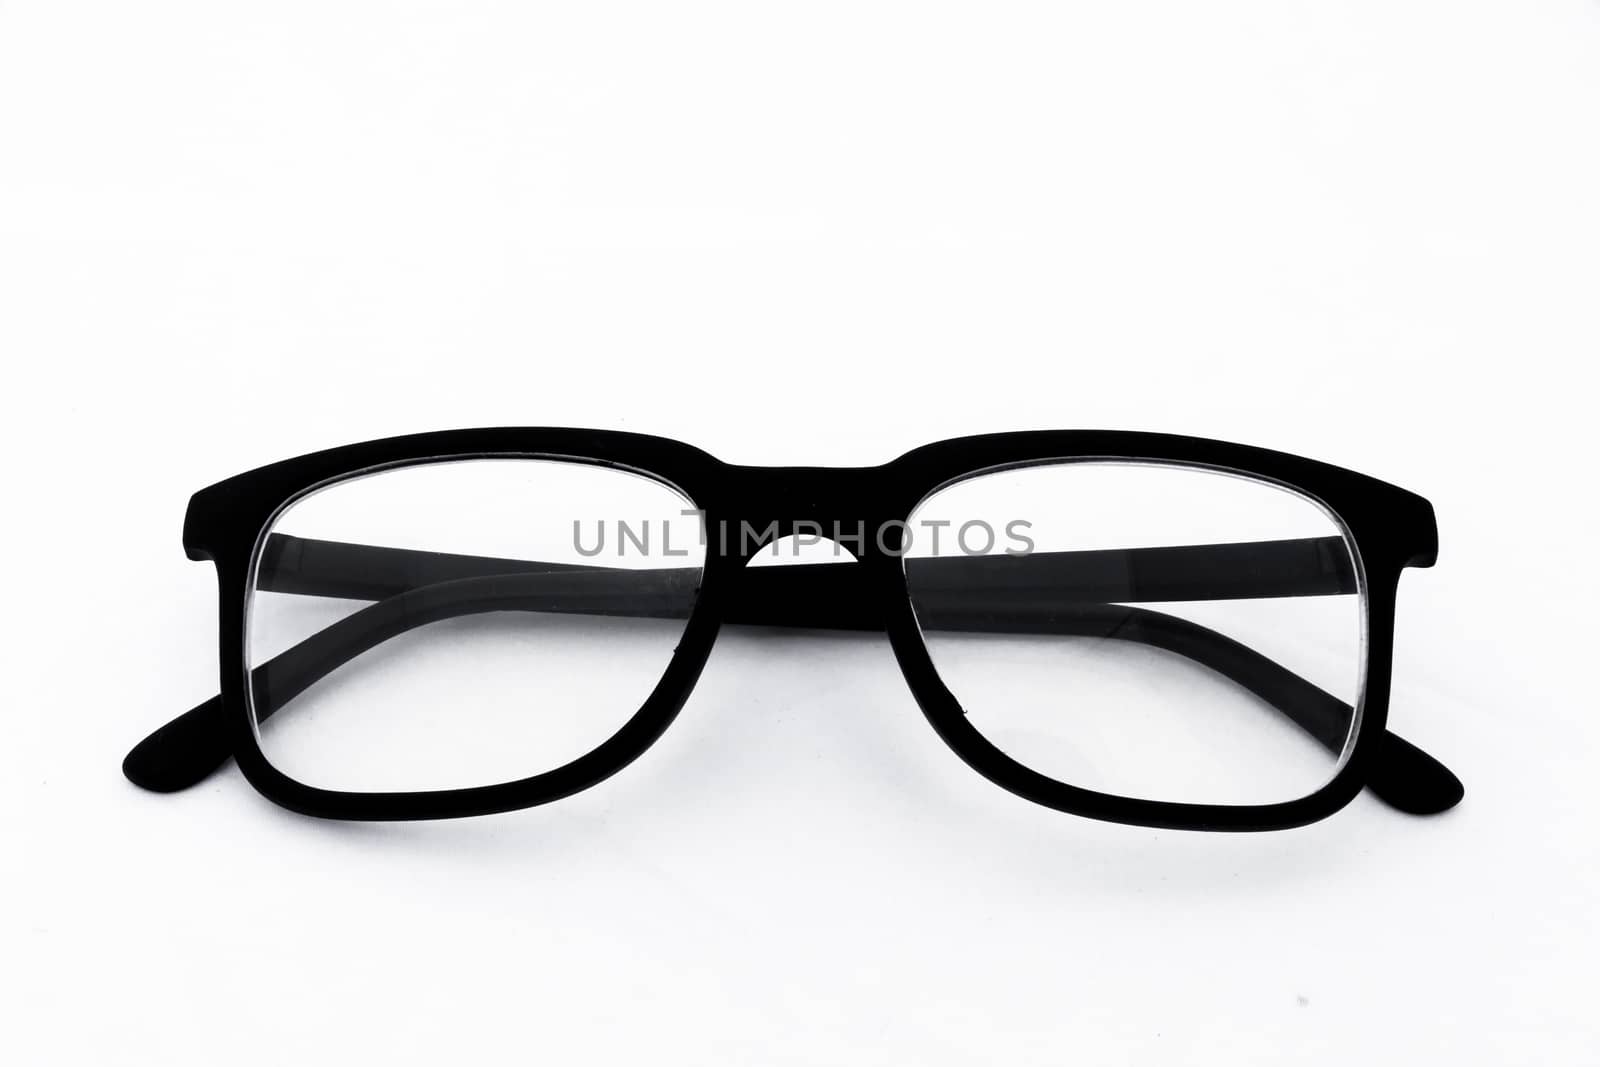 Object eyeglasses isolated on the white by nopparats